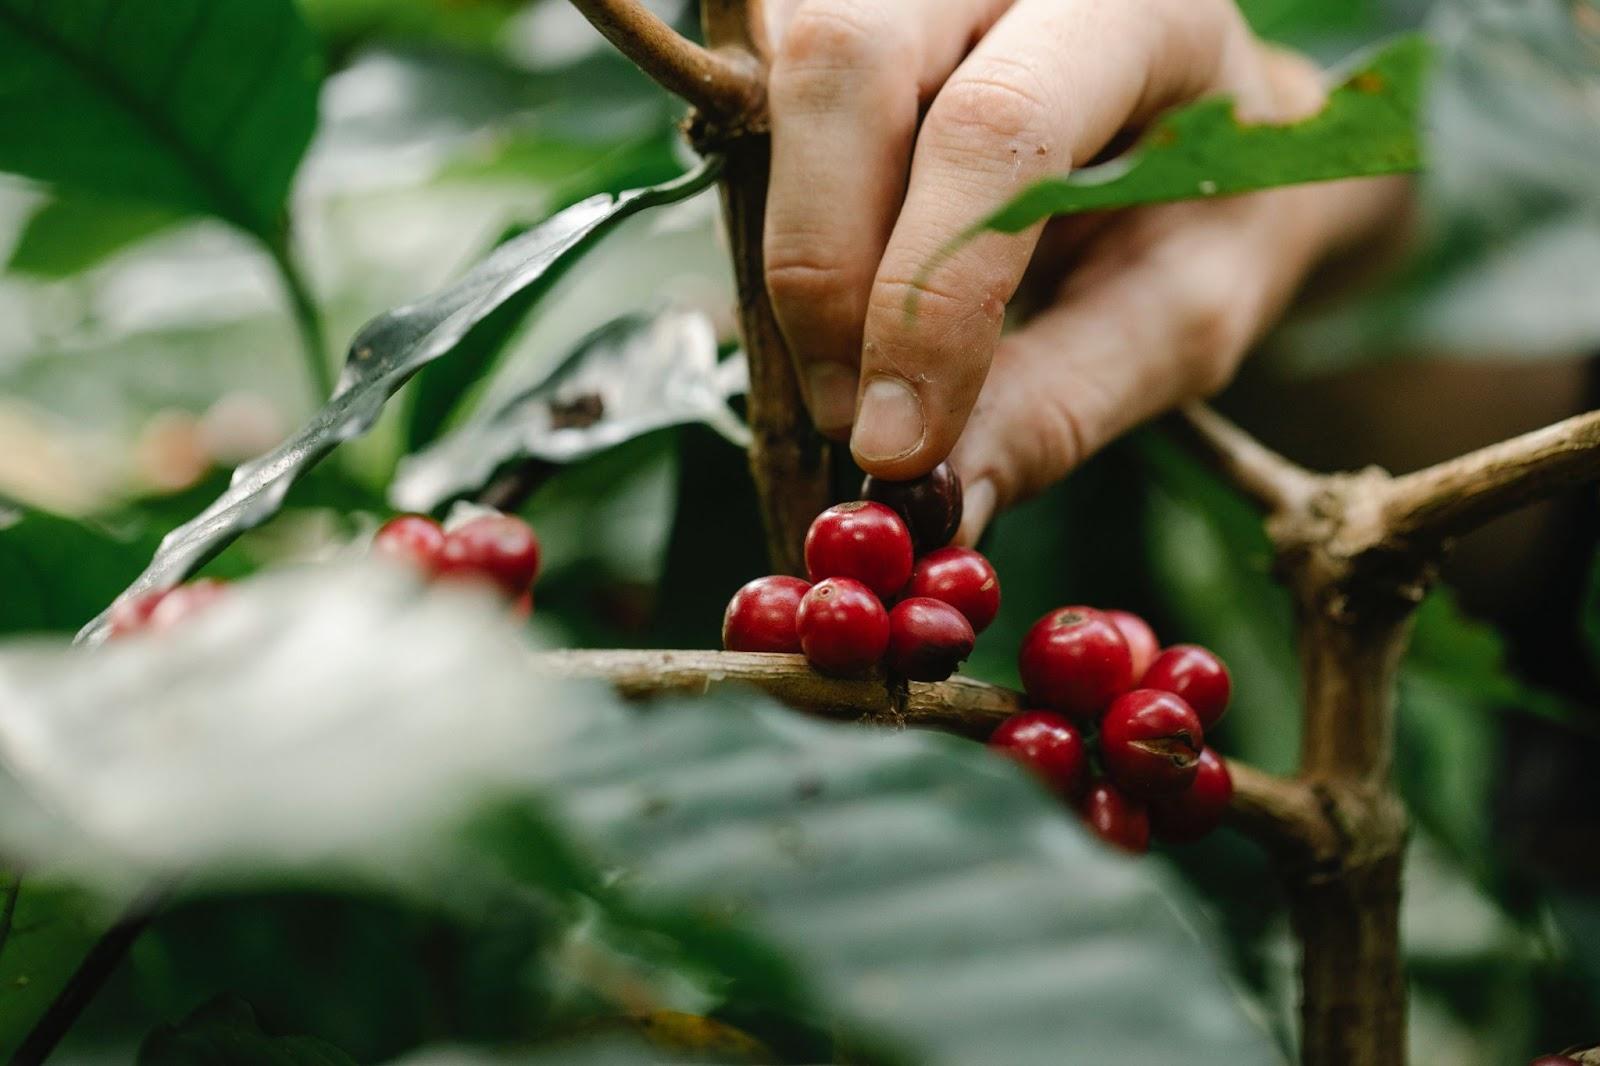 Fingers picking coffee cherry off branch